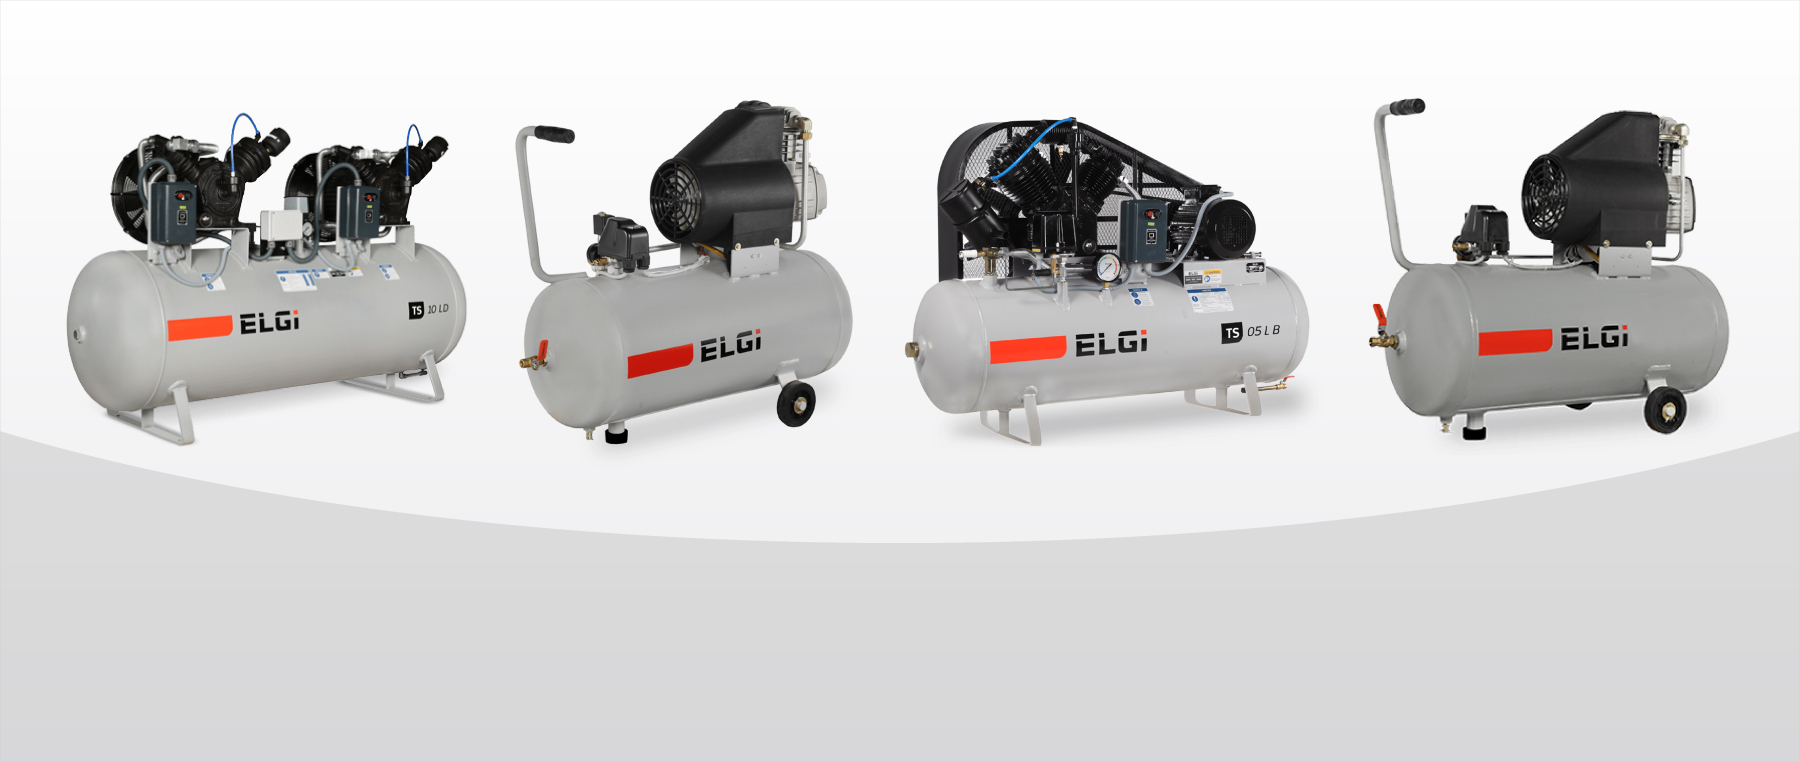 How to choose the right piston air compressor? (Belt Drive or Direct Drive)